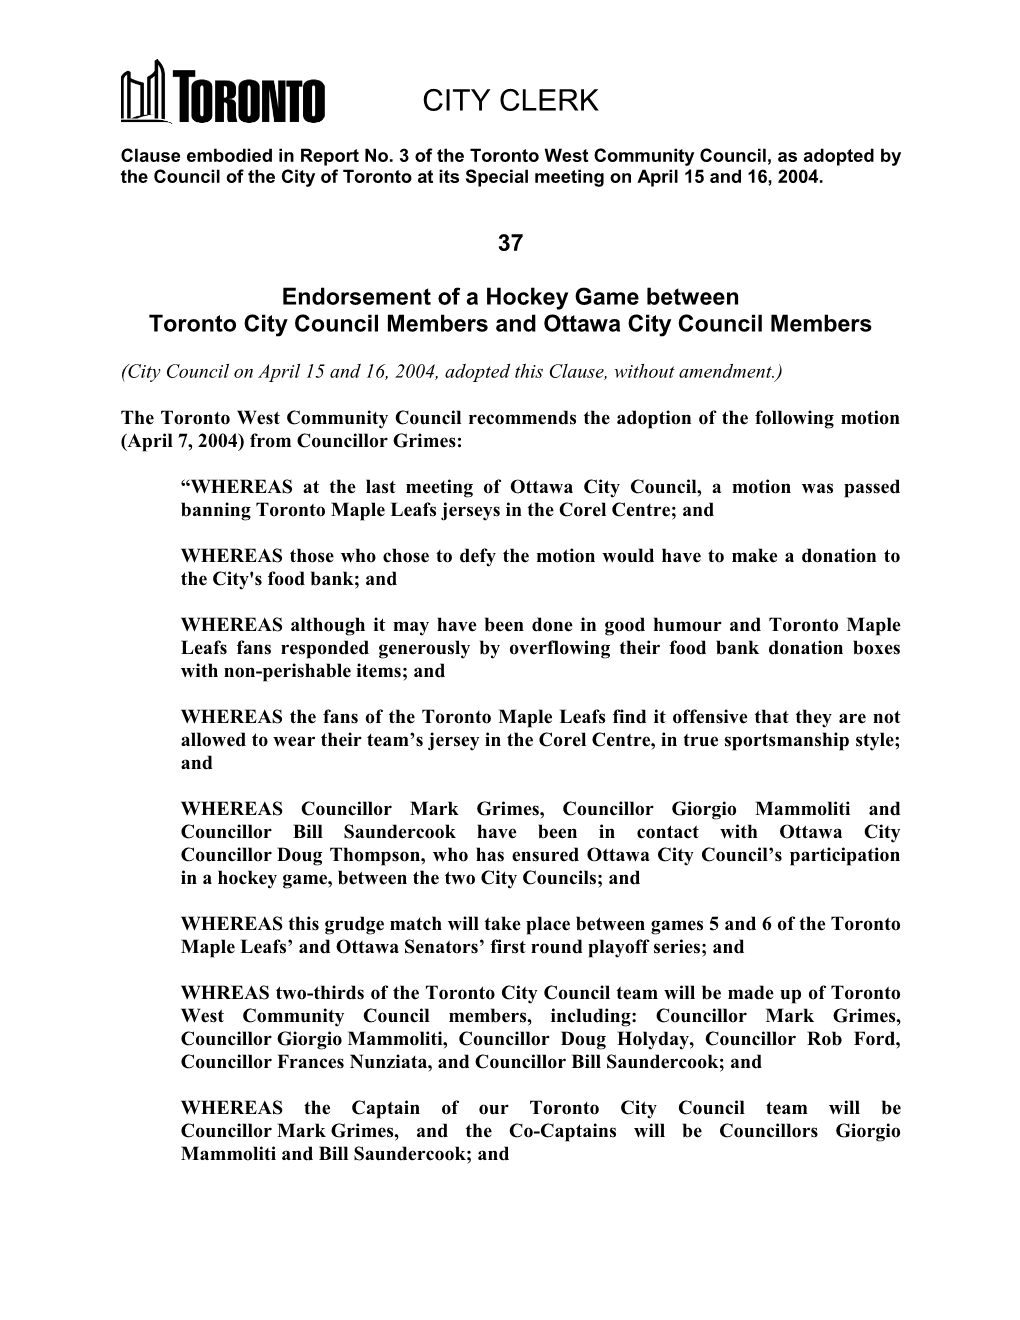 Endorsement of a Hockey Game Between Toronto City Council Members and Ottawa City Council Members